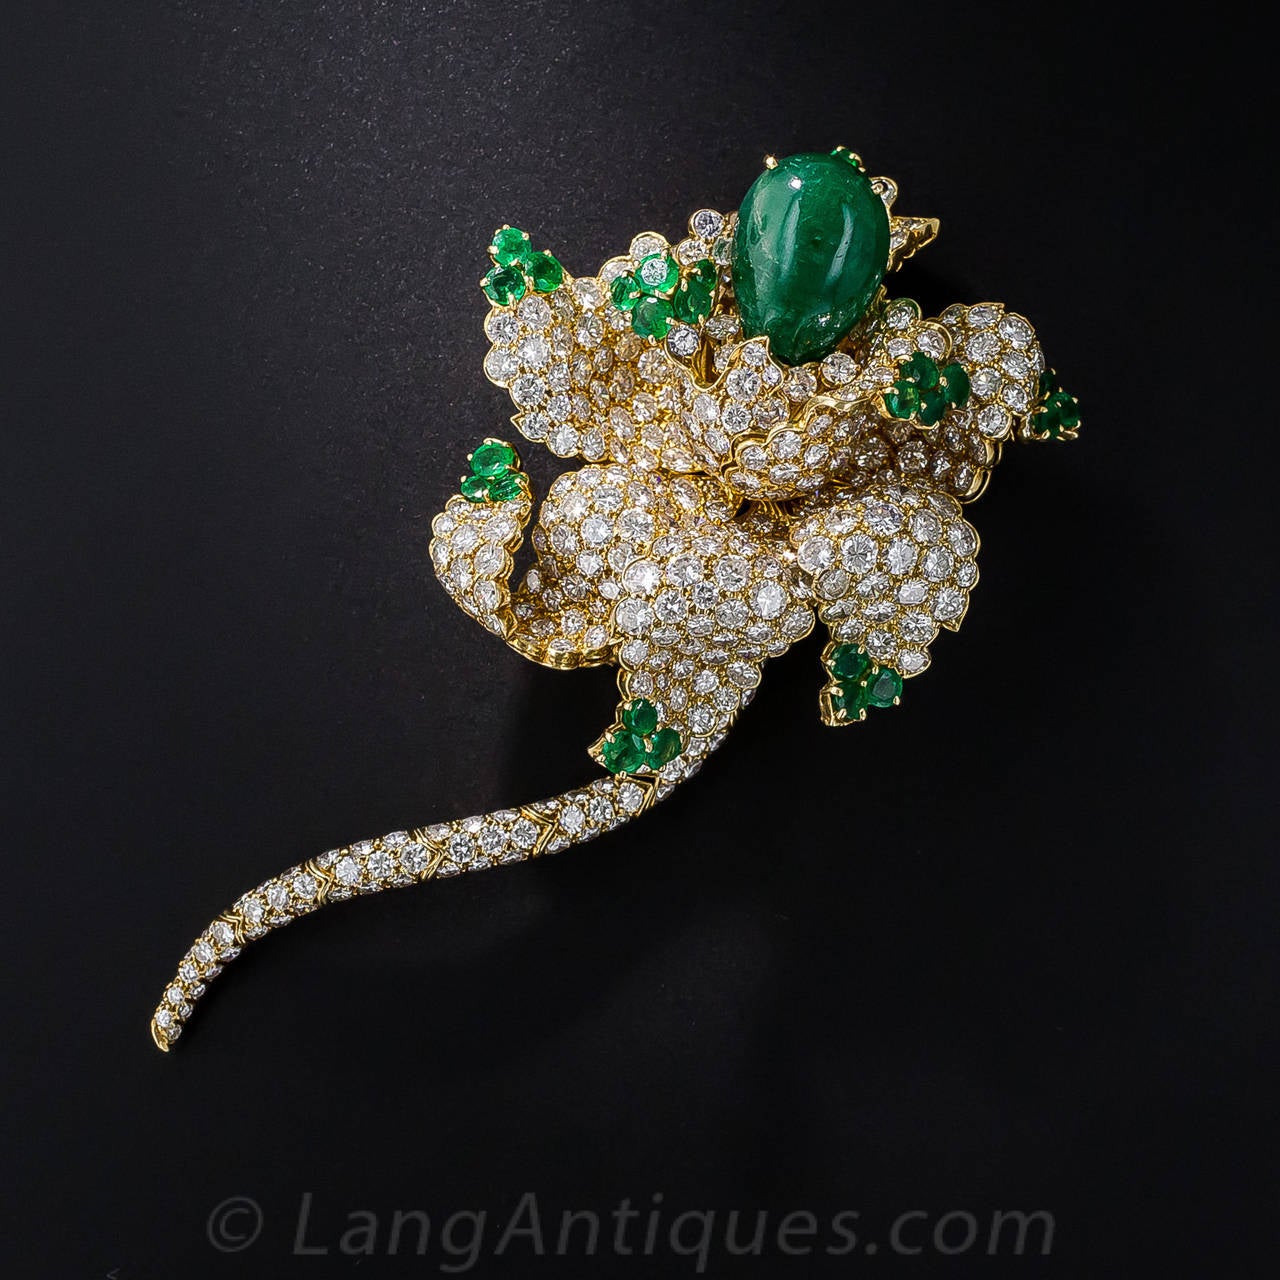 Spectacular 12 Carat Cabochon Emerald Diamond Gold Flower Brooch In Excellent Condition For Sale In San Francisco, CA